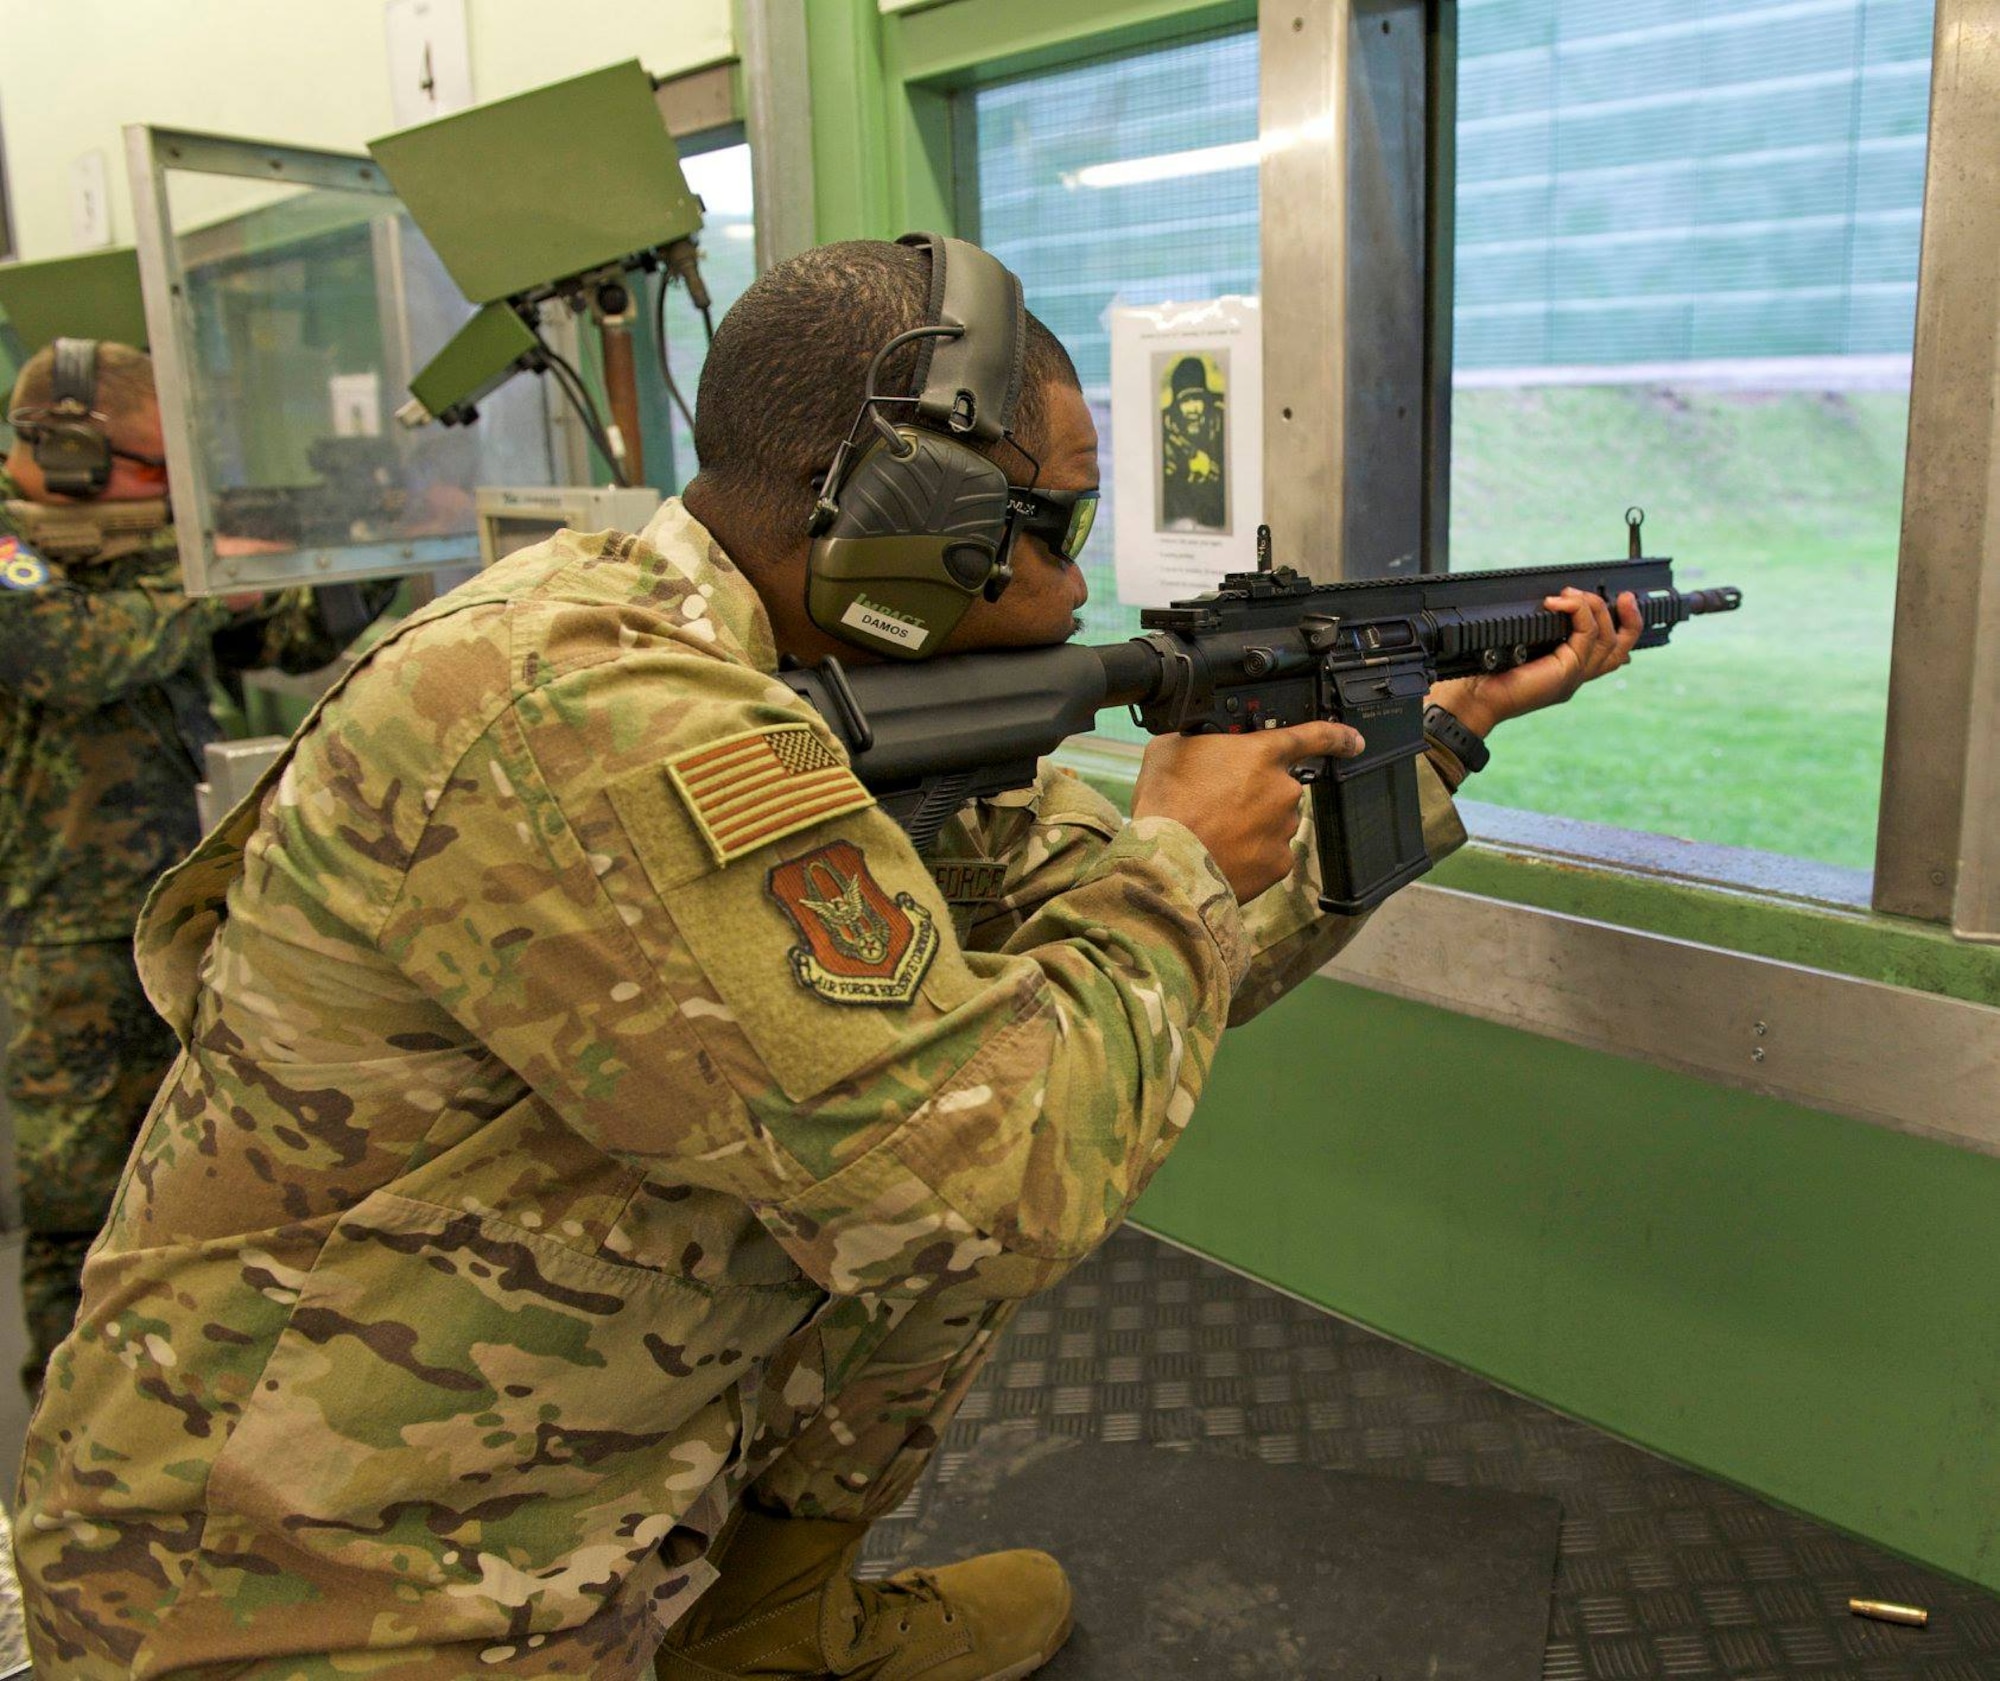 Tech. Sgt. Gregory Myers, a U.S. Air Force Reserve Citizen Airman assigned to the 452nd Security Forces Squadron, competes in the rifle portion of the 2018 Royal Netherlands Marine Corps Shooting Competition Dec. 15 in Den Helder, the Netherlands. The Air Force Reserve Command Shooting Team placed second in pistol marksmanship. Alongside 10 countries, the team represented the United States in the tournament.  (U.S. Air Force photo by Nicholas Janeway)